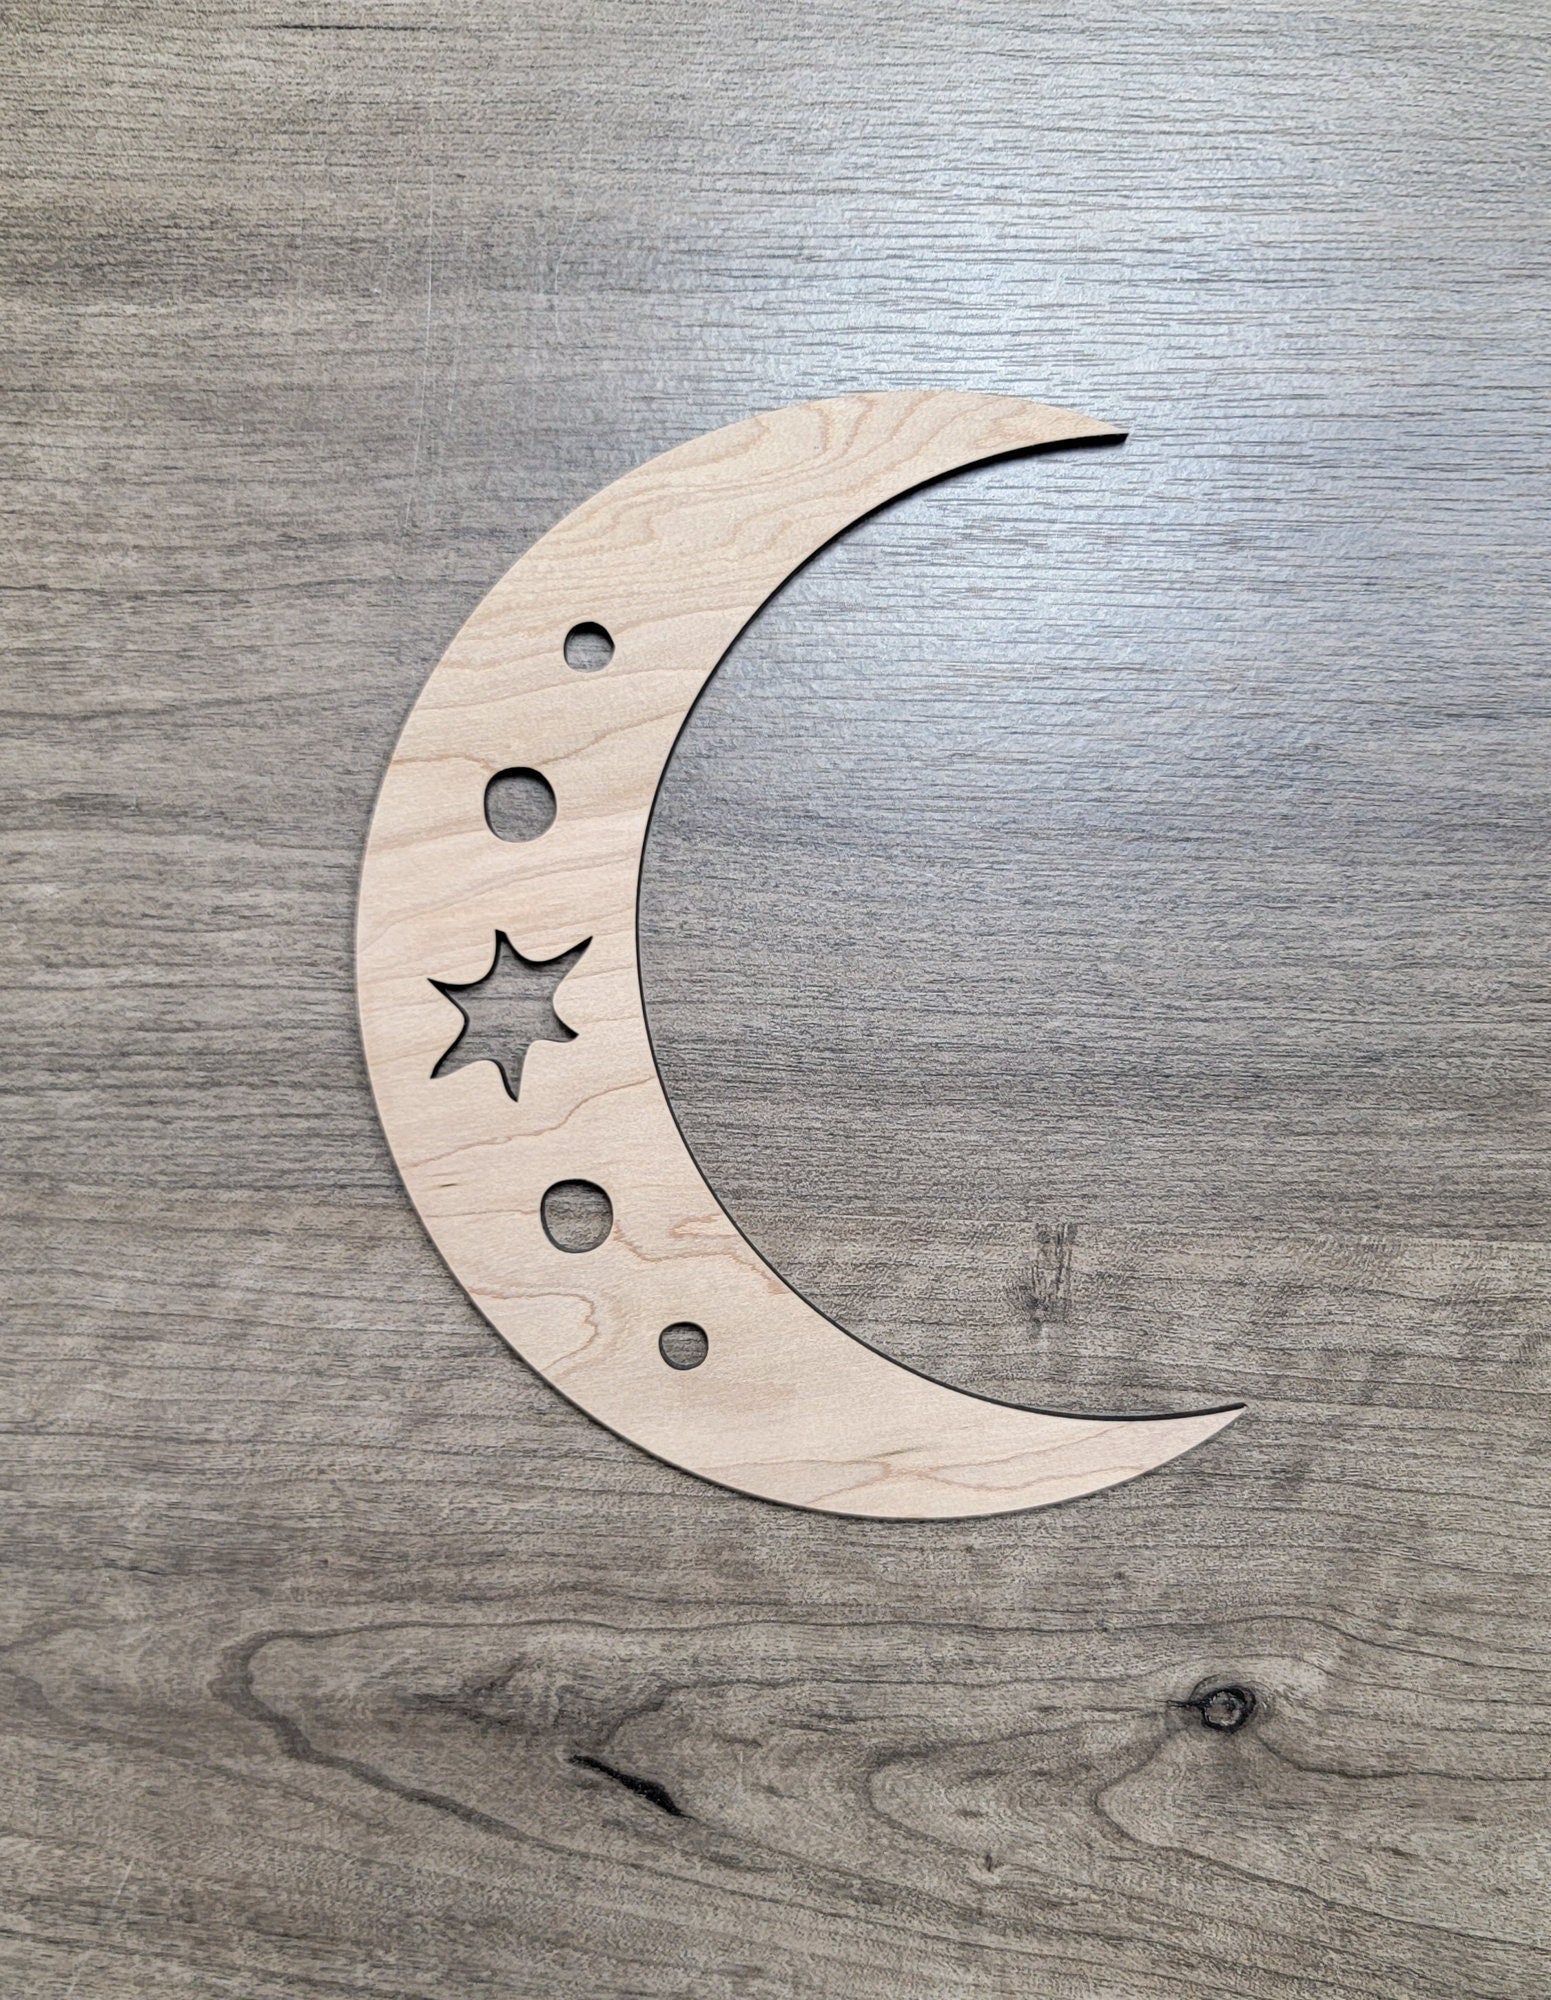 Crescent Moon & Star Wood Shape Sign, Wooden Moon Shape Blank, Unfinished Cut out, Crafts DIY for Sign Making, Boho Decor theme Natural 001